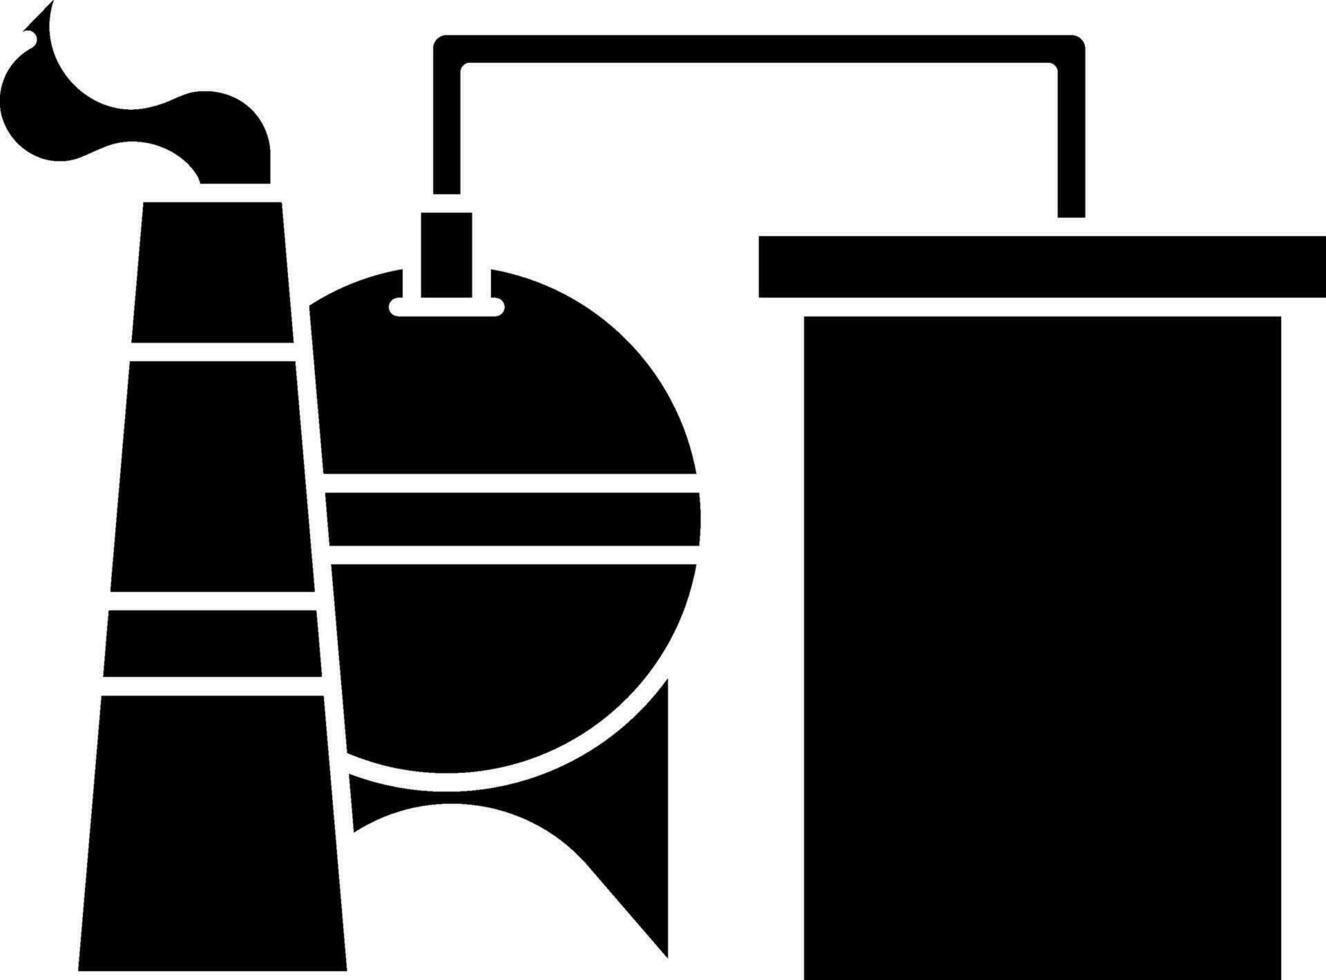 Oil Refinery Or Chemical Plant Icon In black and white Color. vector